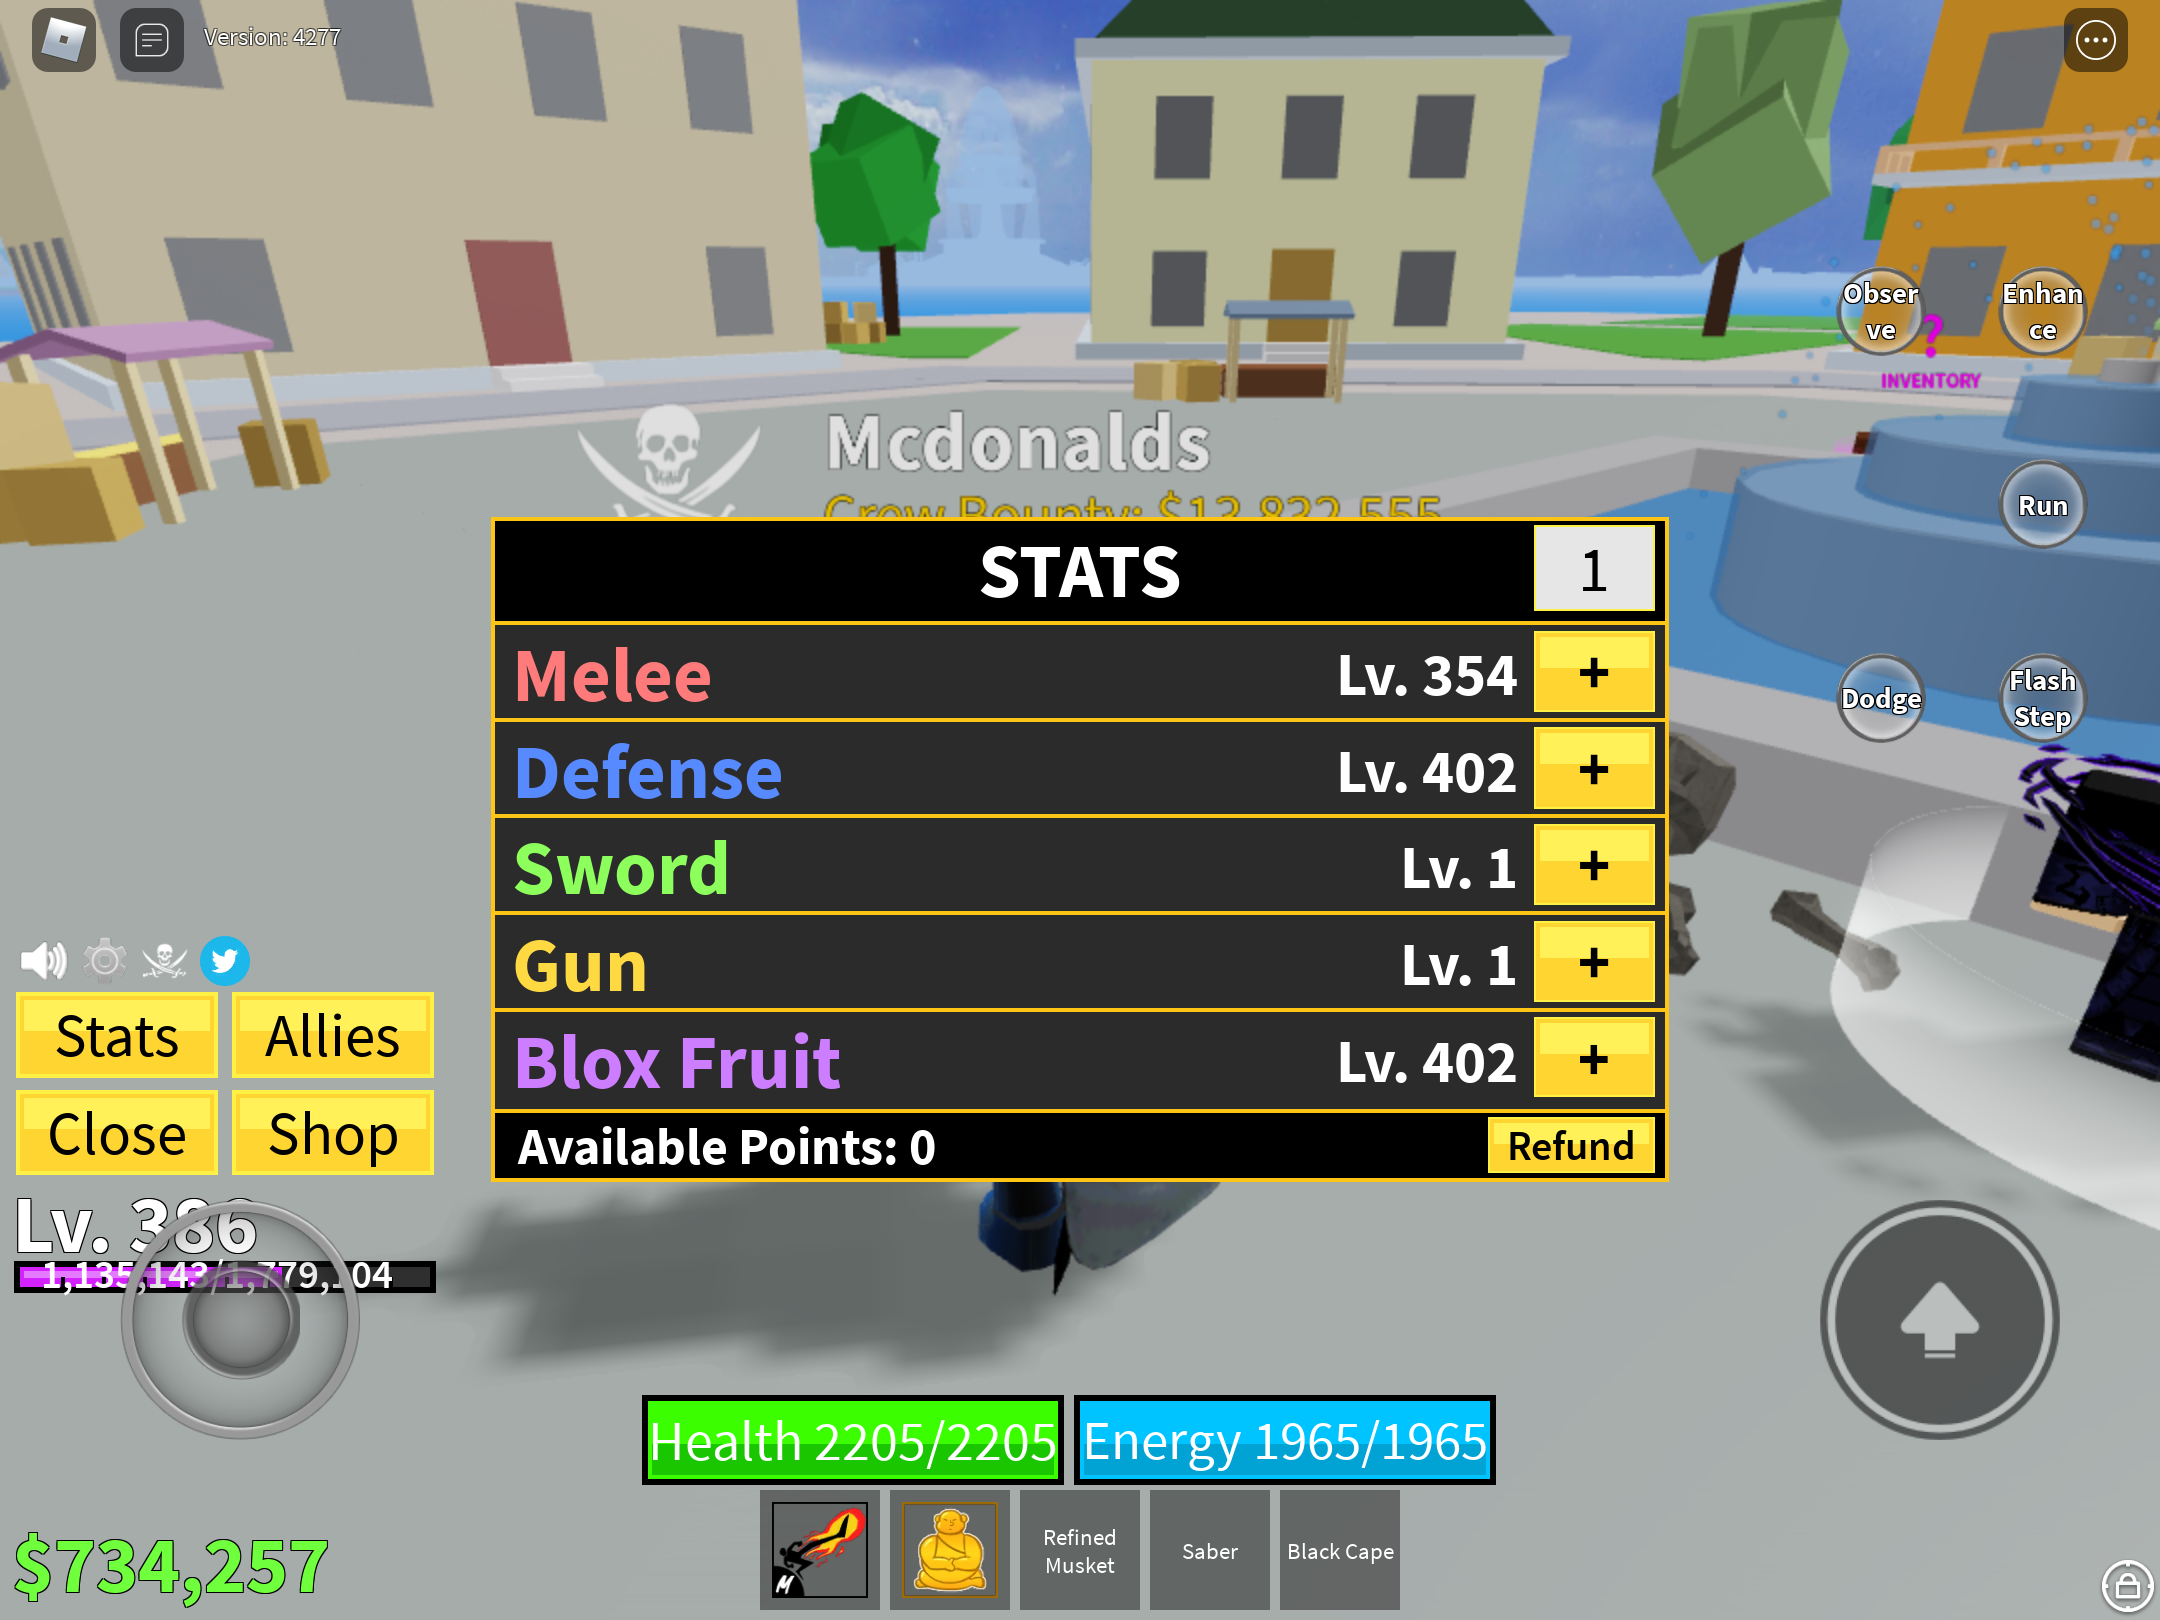 Is Cyborg boss worth grinding in first sea : r/bloxfruits